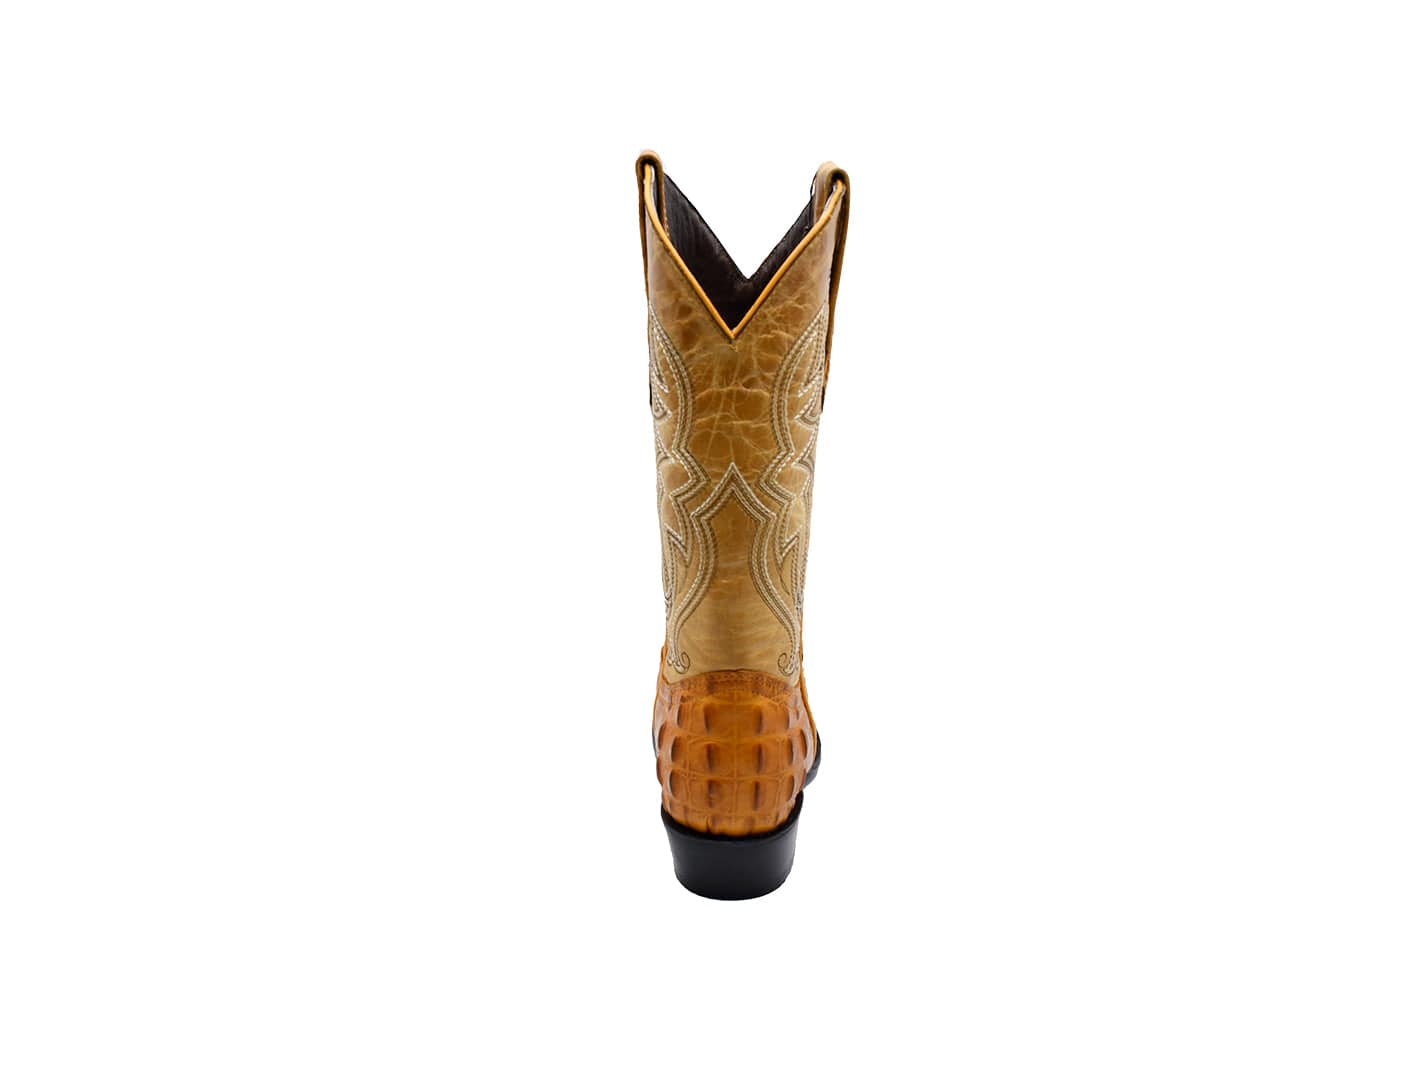 Texas Country Western Boot Caiman Print Mantequilla Round Toe E437